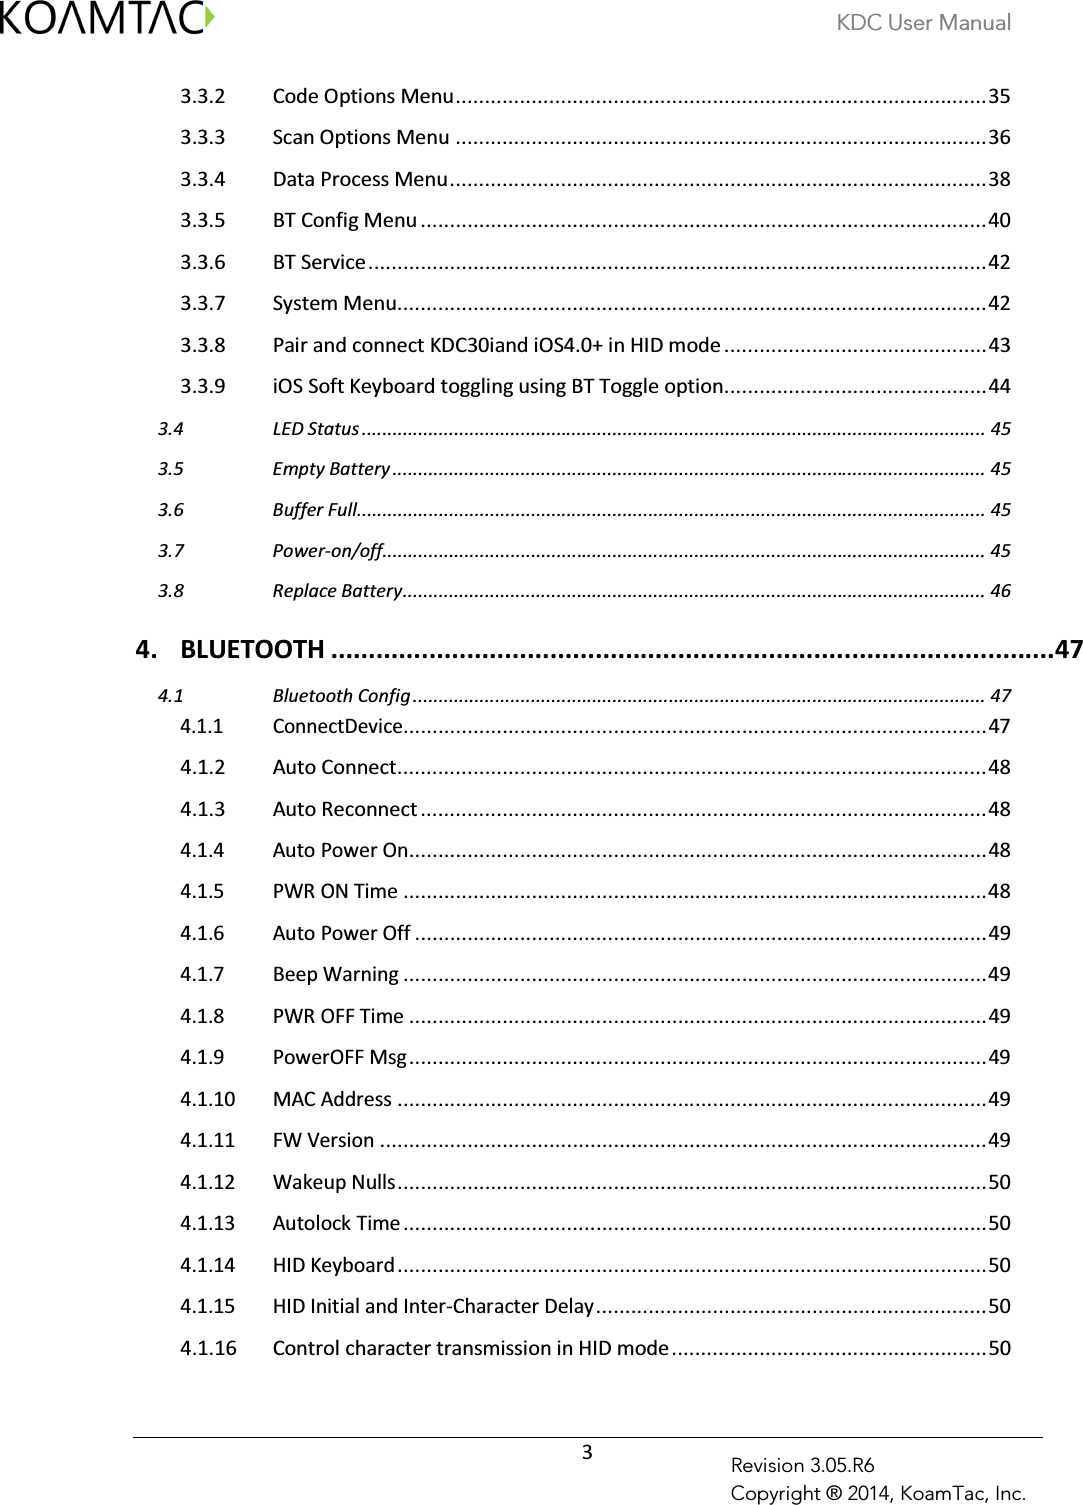 KDC User Manual  3 Revision 3.05.R6 Copyright ® 2014, KoamTac, Inc. 3.3.2 Code Options Menu ........................................................................................... 35 3.3.3 Scan Options Menu ........................................................................................... 36 3.3.4 Data Process Menu ............................................................................................ 38 3.3.5 BT Config Menu ................................................................................................. 40 3.3.6 BT Service .......................................................................................................... 42 3.3.7 System Menu ..................................................................................................... 42 3.3.8 Pair and connect KDC30iand iOS4.0+ in HID mode ............................................. 43 3.3.9 iOS Soft Keyboard toggling using BT Toggle option ............................................. 44  LED Status .......................................................................................................................... 45 3.4 Empty Battery .................................................................................................................... 45 3.5 Buffer Full........................................................................................................................... 45 3.6 Power-on/off...................................................................................................................... 45 3.7 Replace Battery .................................................................................................................. 46 3.84. BLUETOOTH ................................................................................................ 47  Bluetooth Config ................................................................................................................ 47 4.14.1.1 ConnectDevice.................................................................................................... 47 4.1.2 Auto Connect ..................................................................................................... 48 4.1.3 Auto Reconnect ................................................................................................. 48 4.1.4 Auto Power On ................................................................................................... 48 4.1.5 PWR ON Time .................................................................................................... 48 4.1.6 Auto Power Off .................................................................................................. 49 4.1.7 Beep Warning .................................................................................................... 49 4.1.8 PWR OFF Time ................................................................................................... 49 4.1.9 PowerOFF Msg ................................................................................................... 49 4.1.10 MAC Address ..................................................................................................... 49 4.1.11 FW Version ........................................................................................................ 49 4.1.12 Wakeup Nulls ..................................................................................................... 50 4.1.13 Autolock Time .................................................................................................... 50 4.1.14 HID Keyboard ..................................................................................................... 50 4.1.15 HID Initial and Inter-Character Delay ................................................................... 50 4.1.16 Control character transmission in HID mode ...................................................... 50 